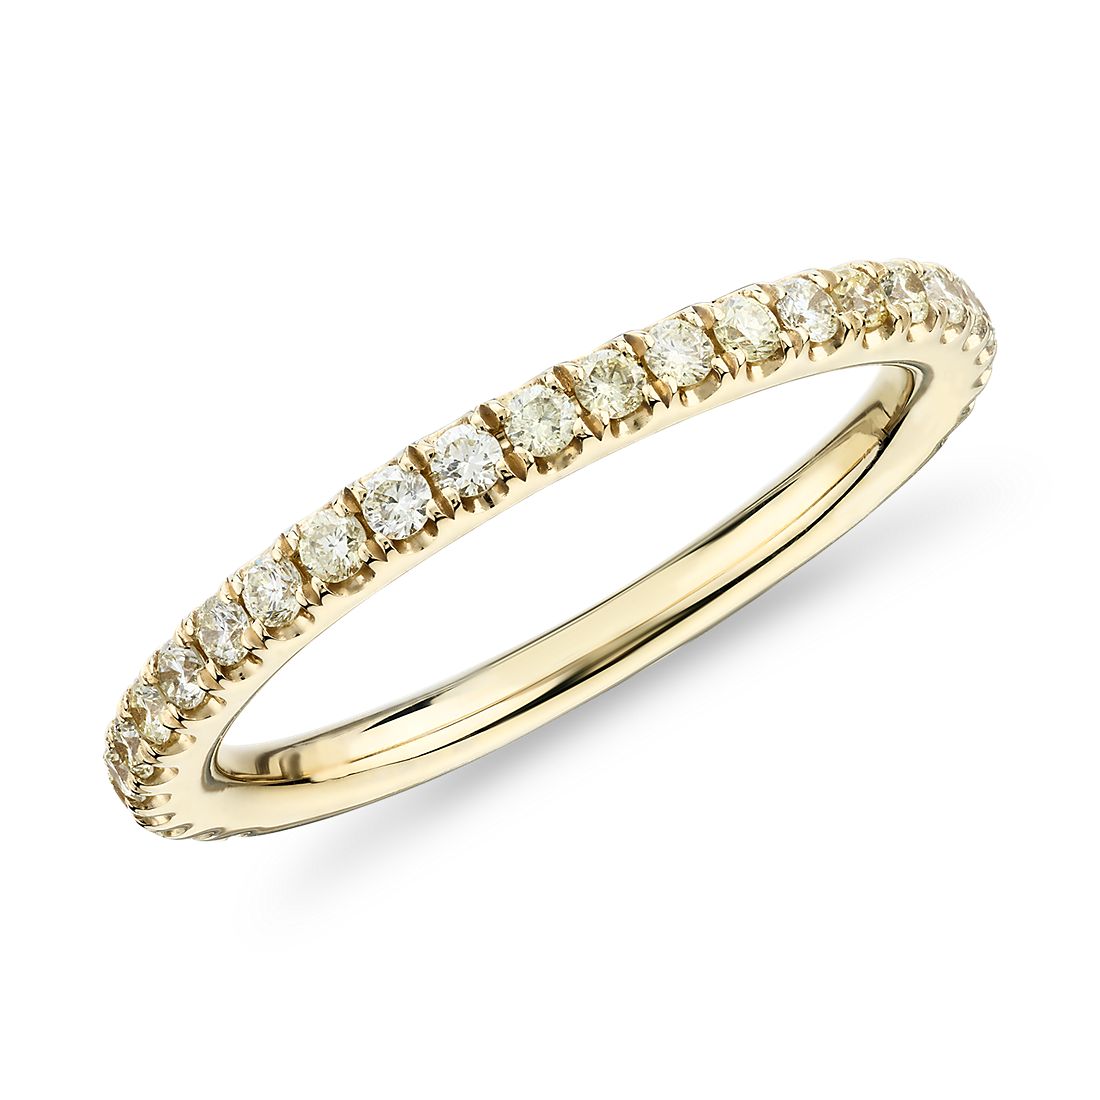 French Pavé Yellow Diamond Ring in 14k Yellow Gold (1/3 ct. tw.)